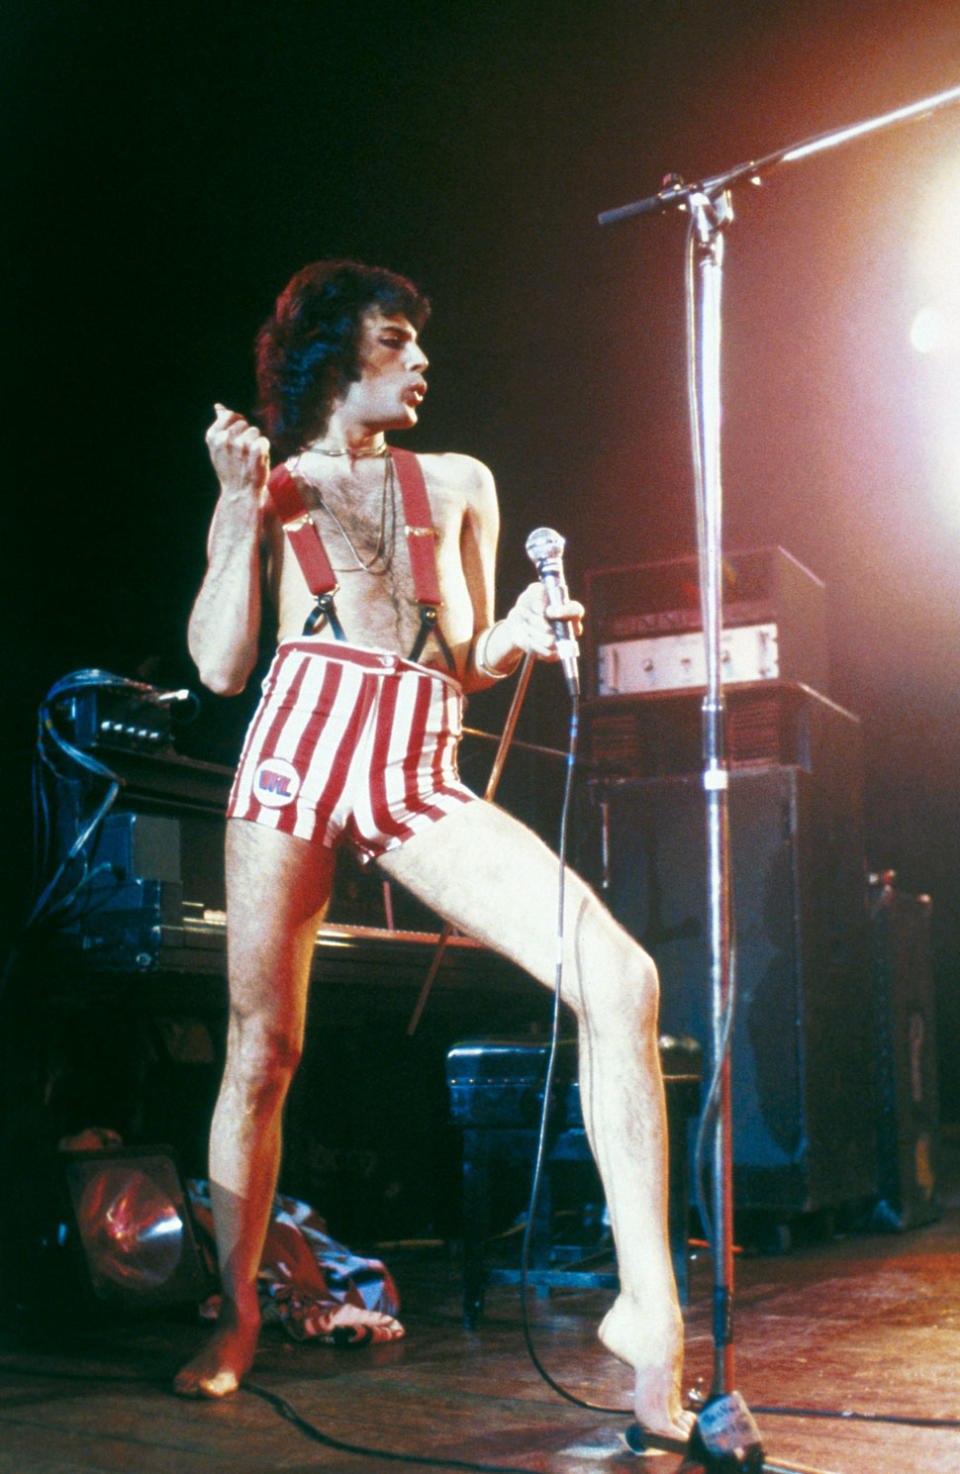 Freddie Mercury on stage at Madison Square Garden in New York City in February 1977